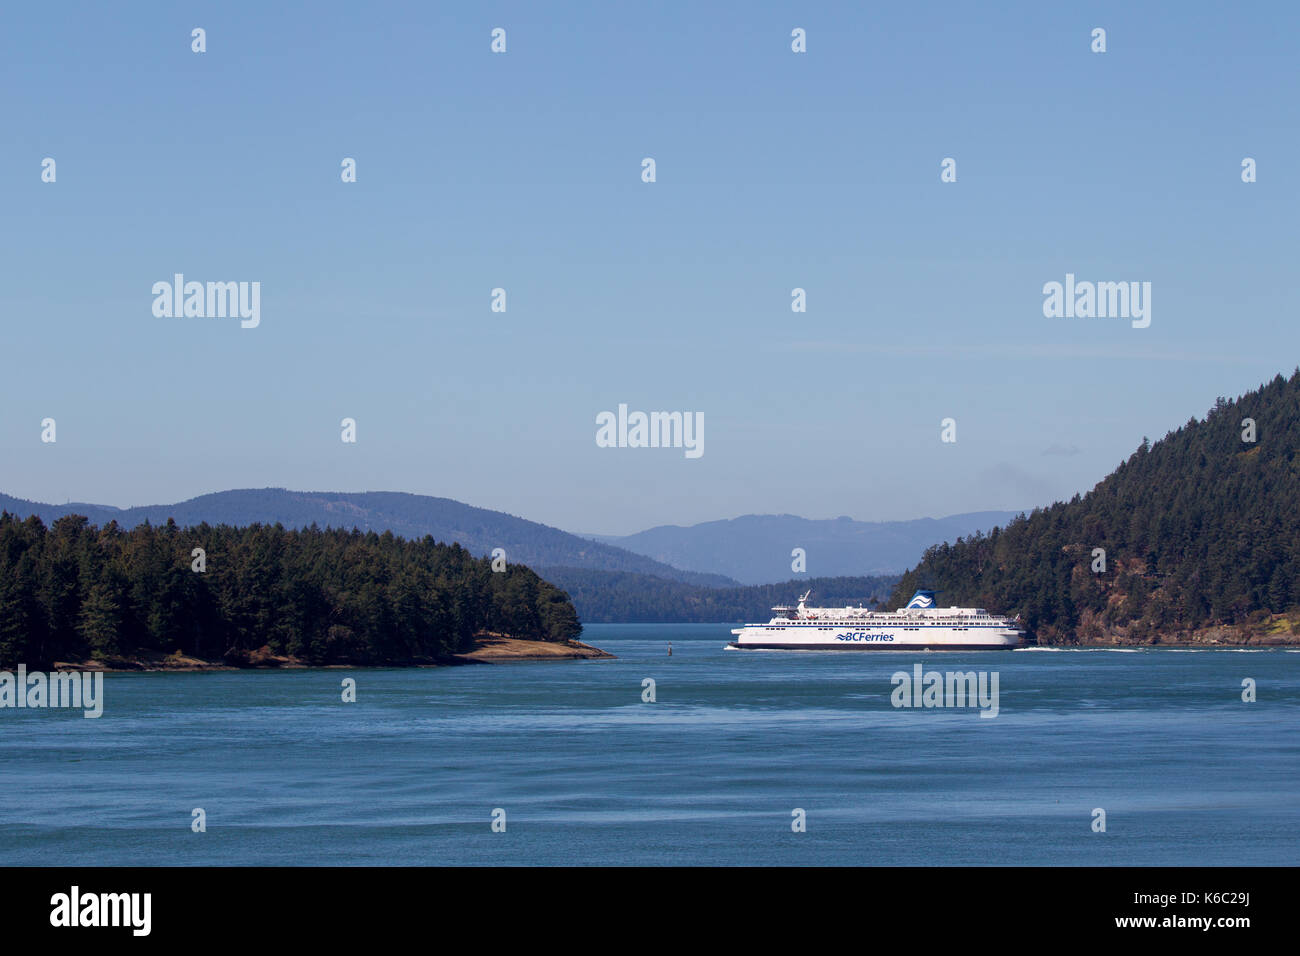 The Spirit of British Columbia, a ferry of BC Ferries, between the Gulf Islands at Vancouver Island, British Columbia, Canada. Stock Photo